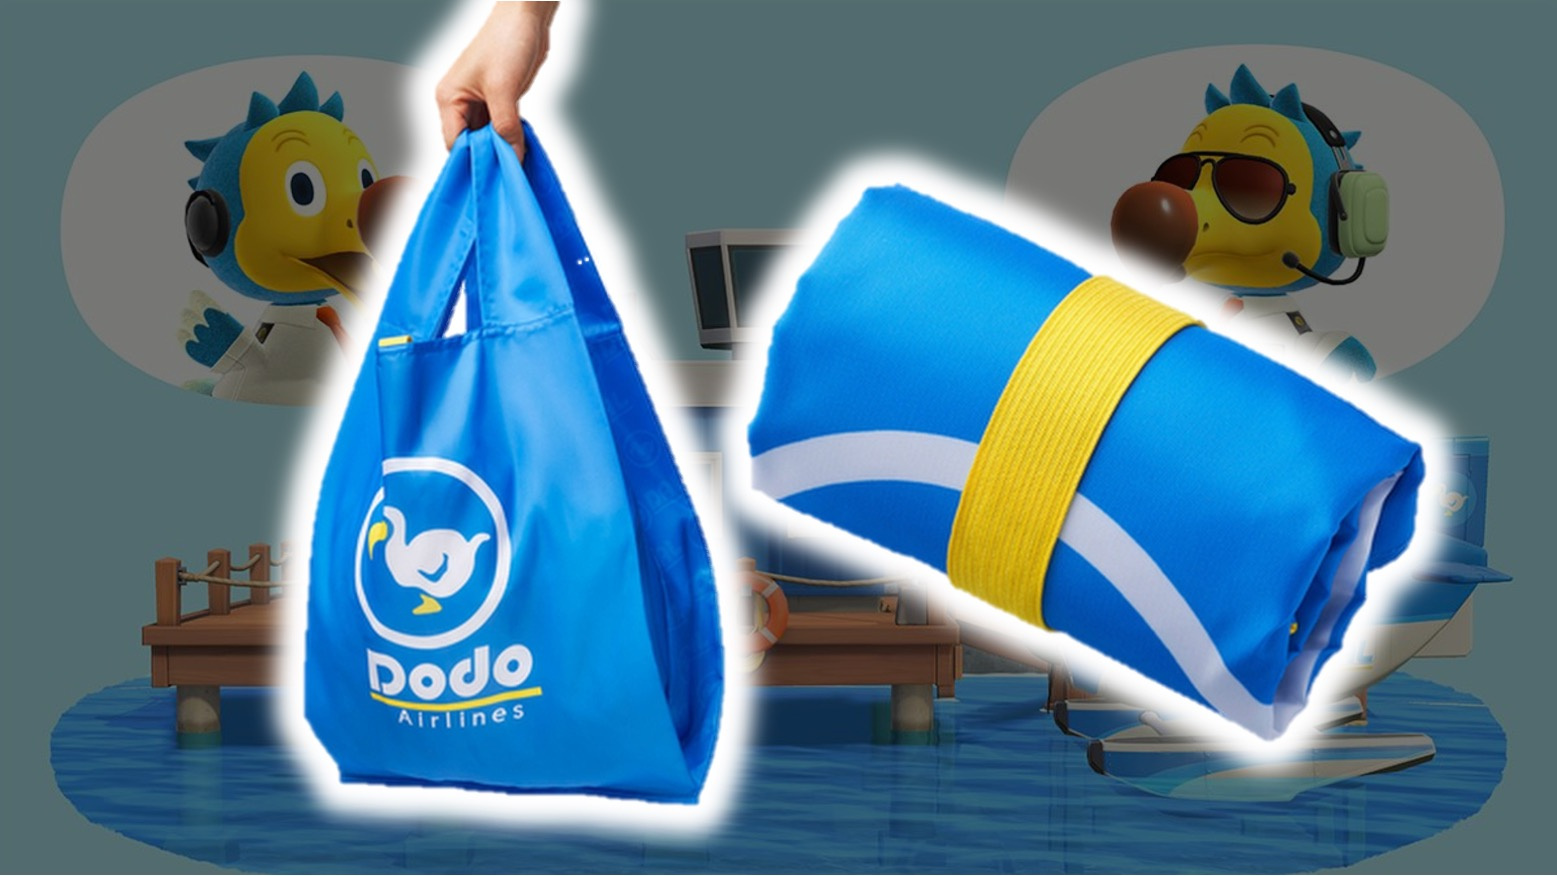 dodo airlines poster